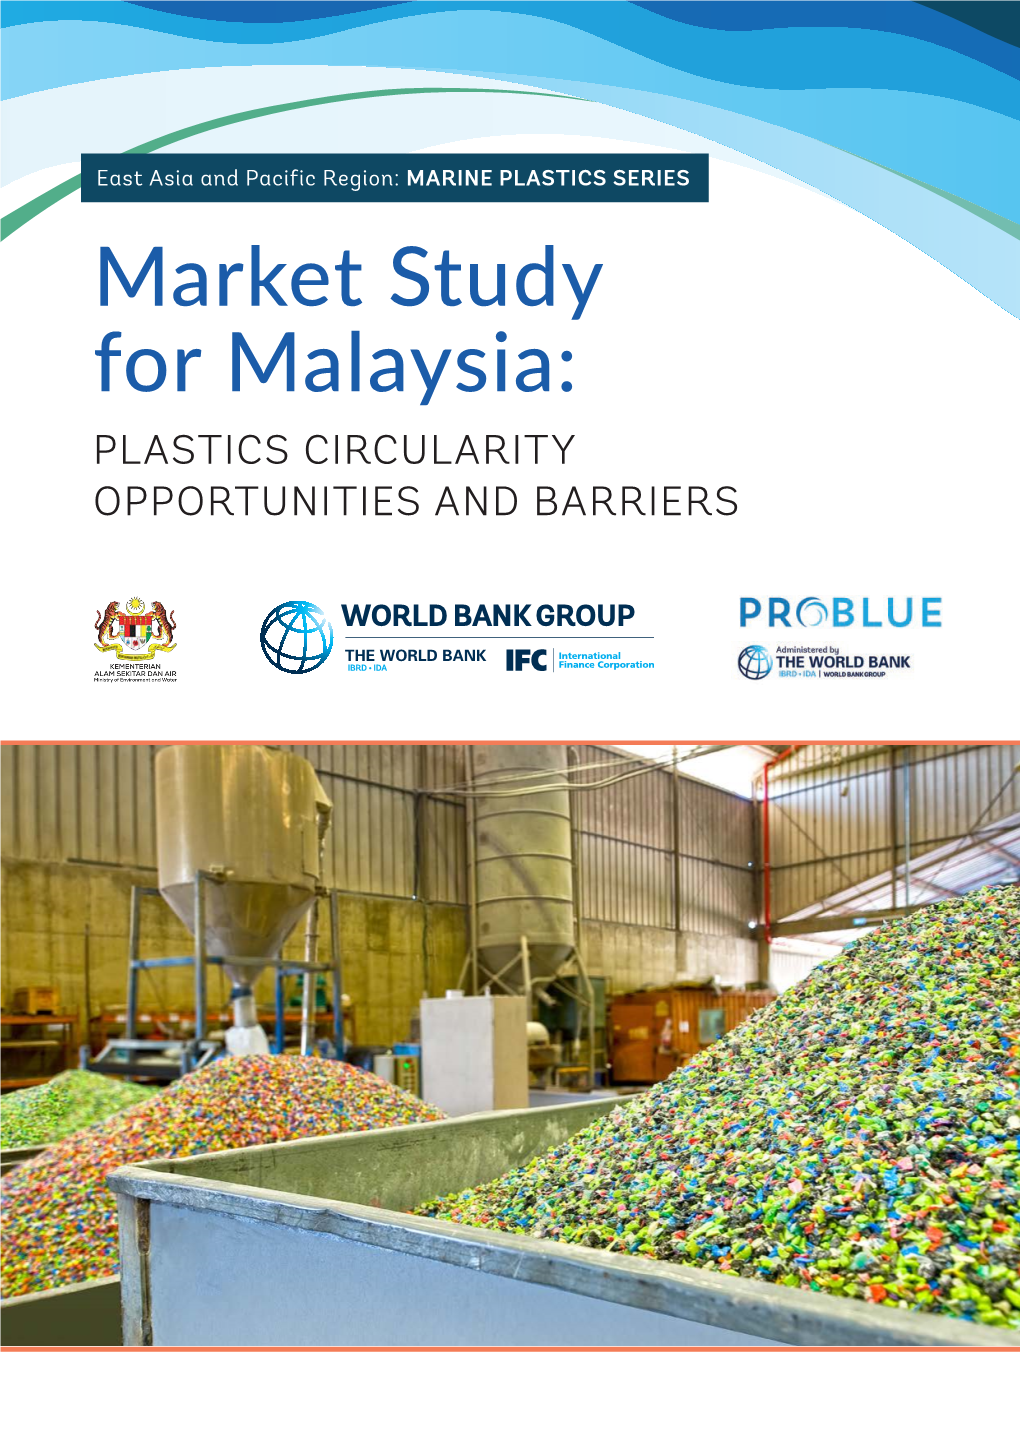 Market Study for Malaysia: Plastics Circularity Opportunities and Barriers